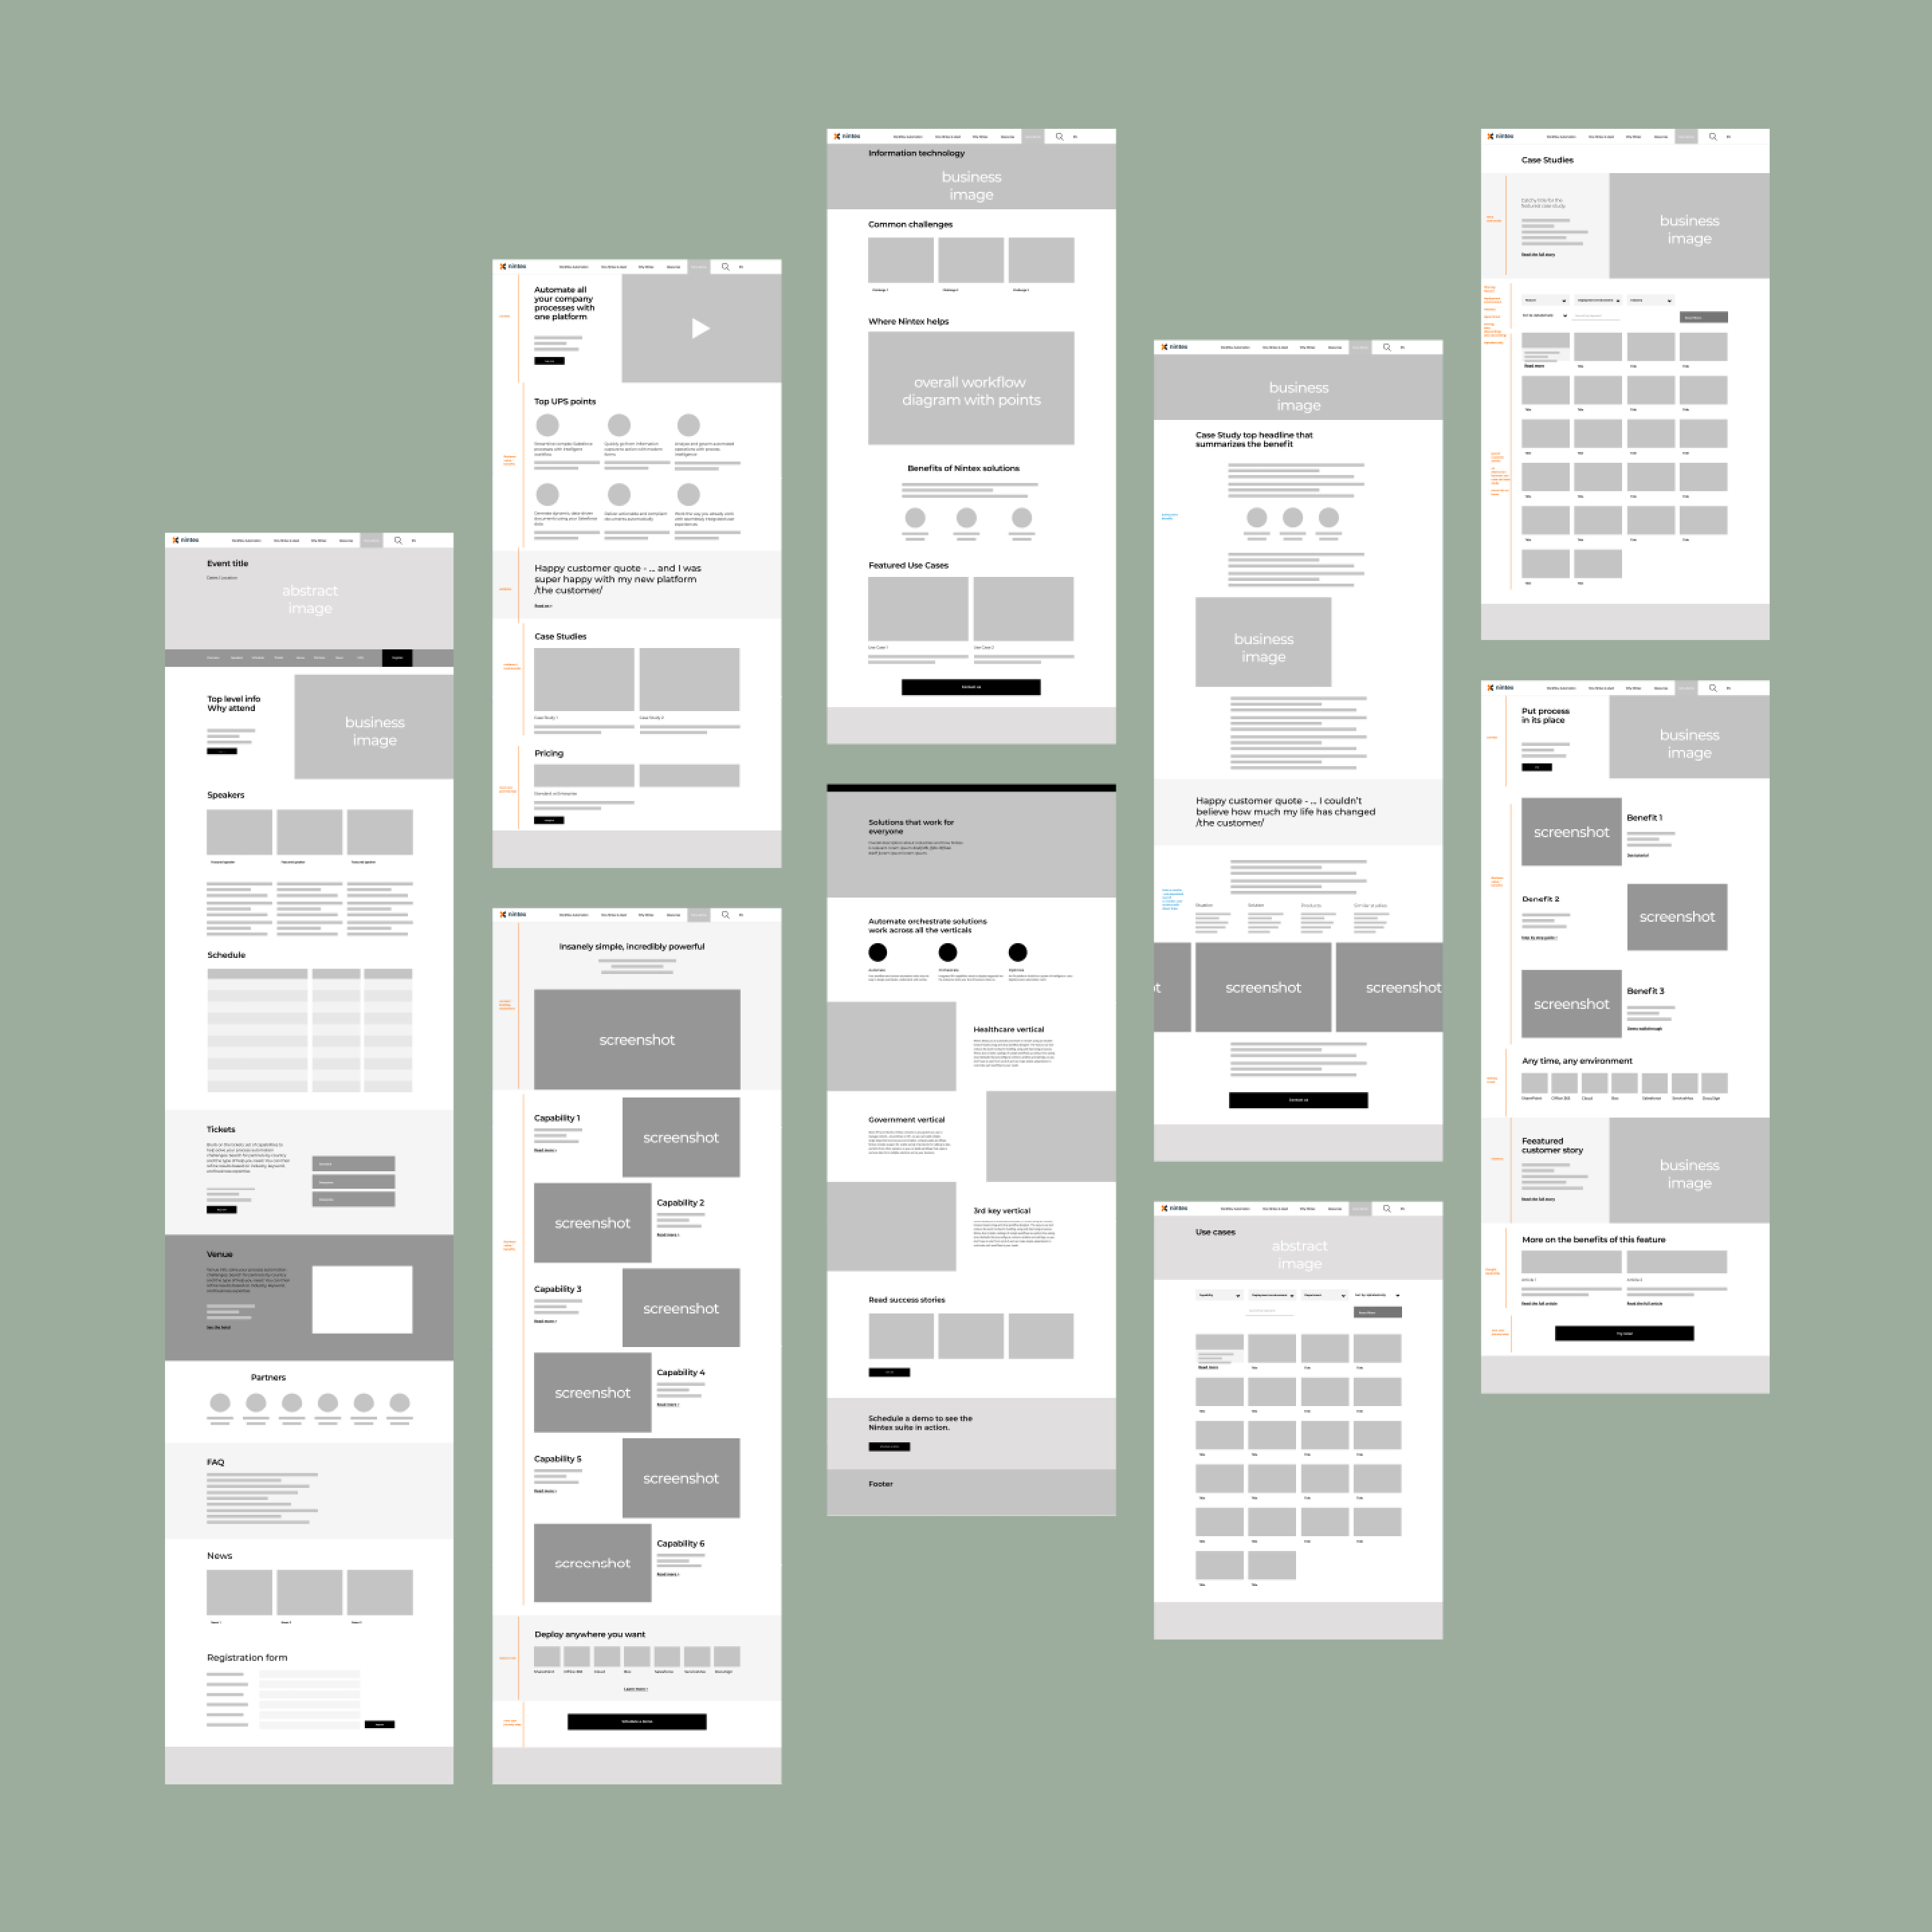 Early wireframes of page architecture